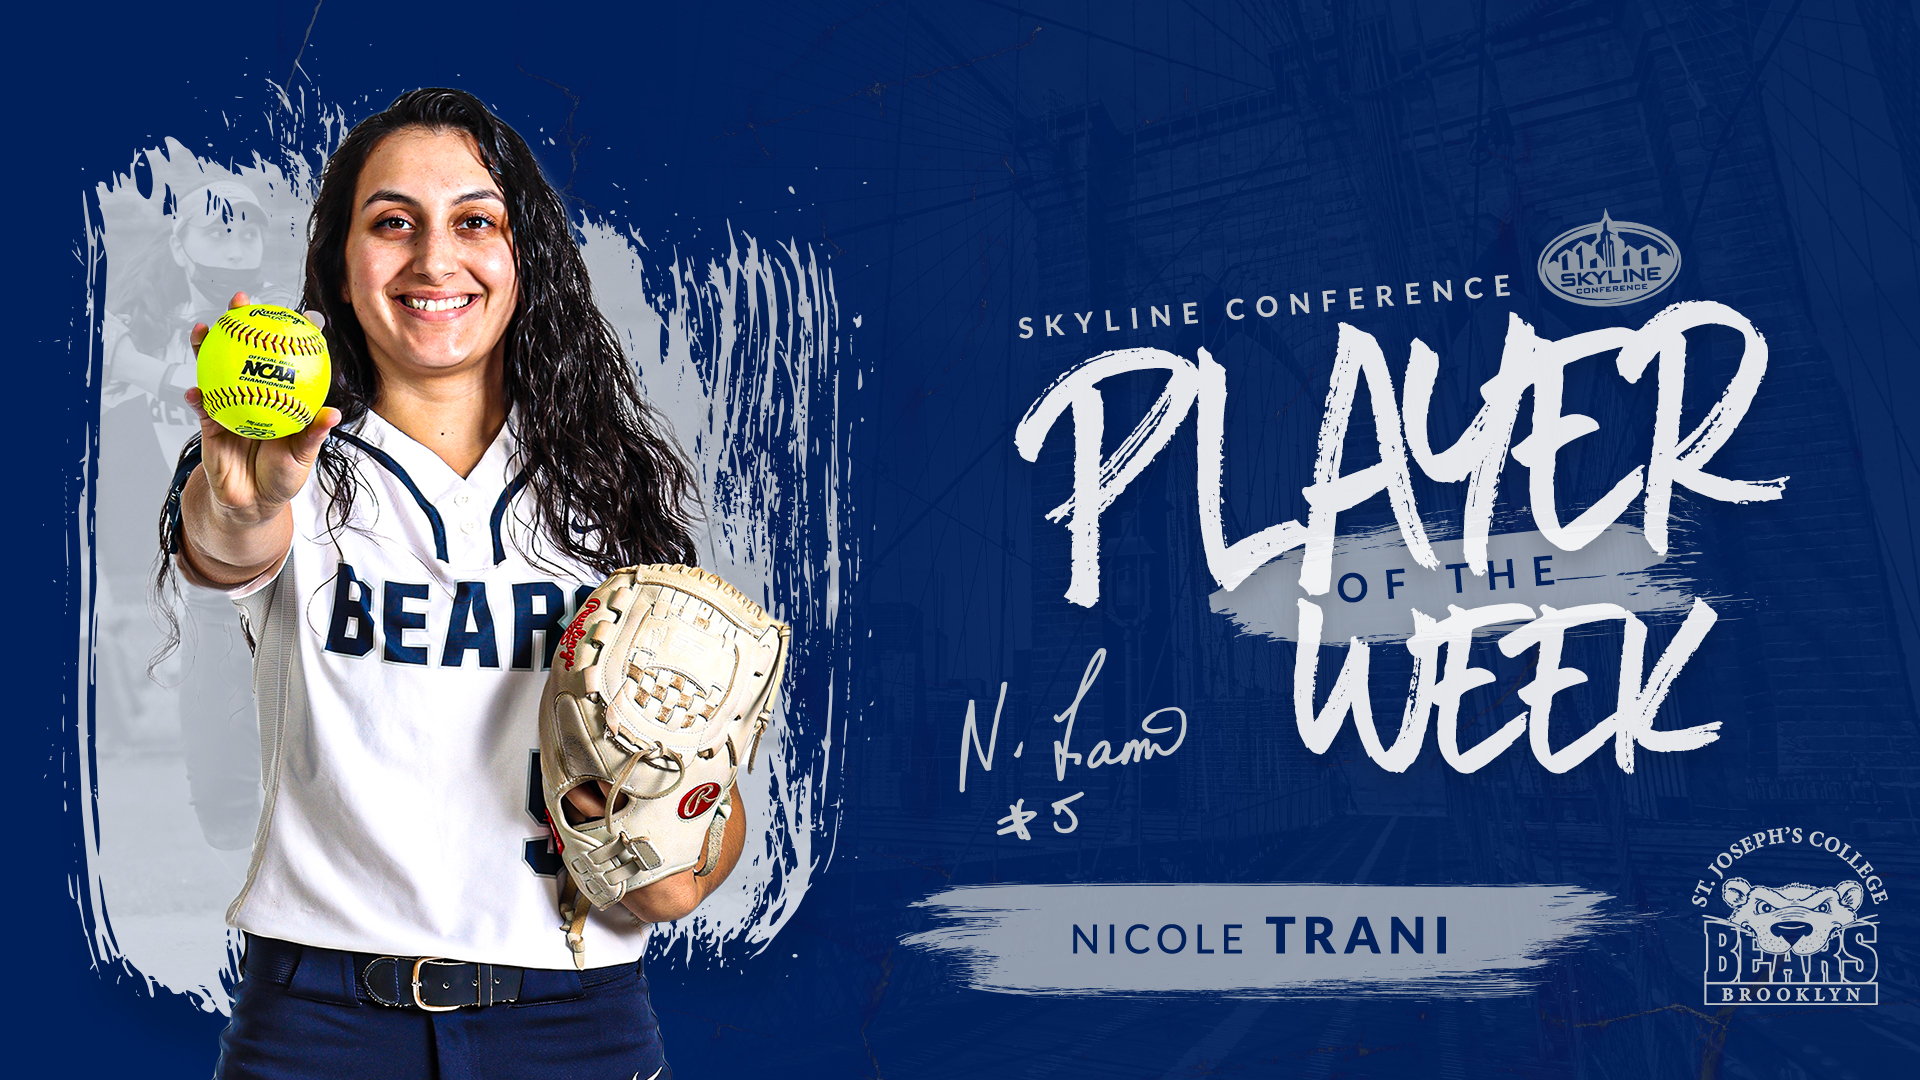 Trani Selected as Skyline Conference Softball Player of the Week